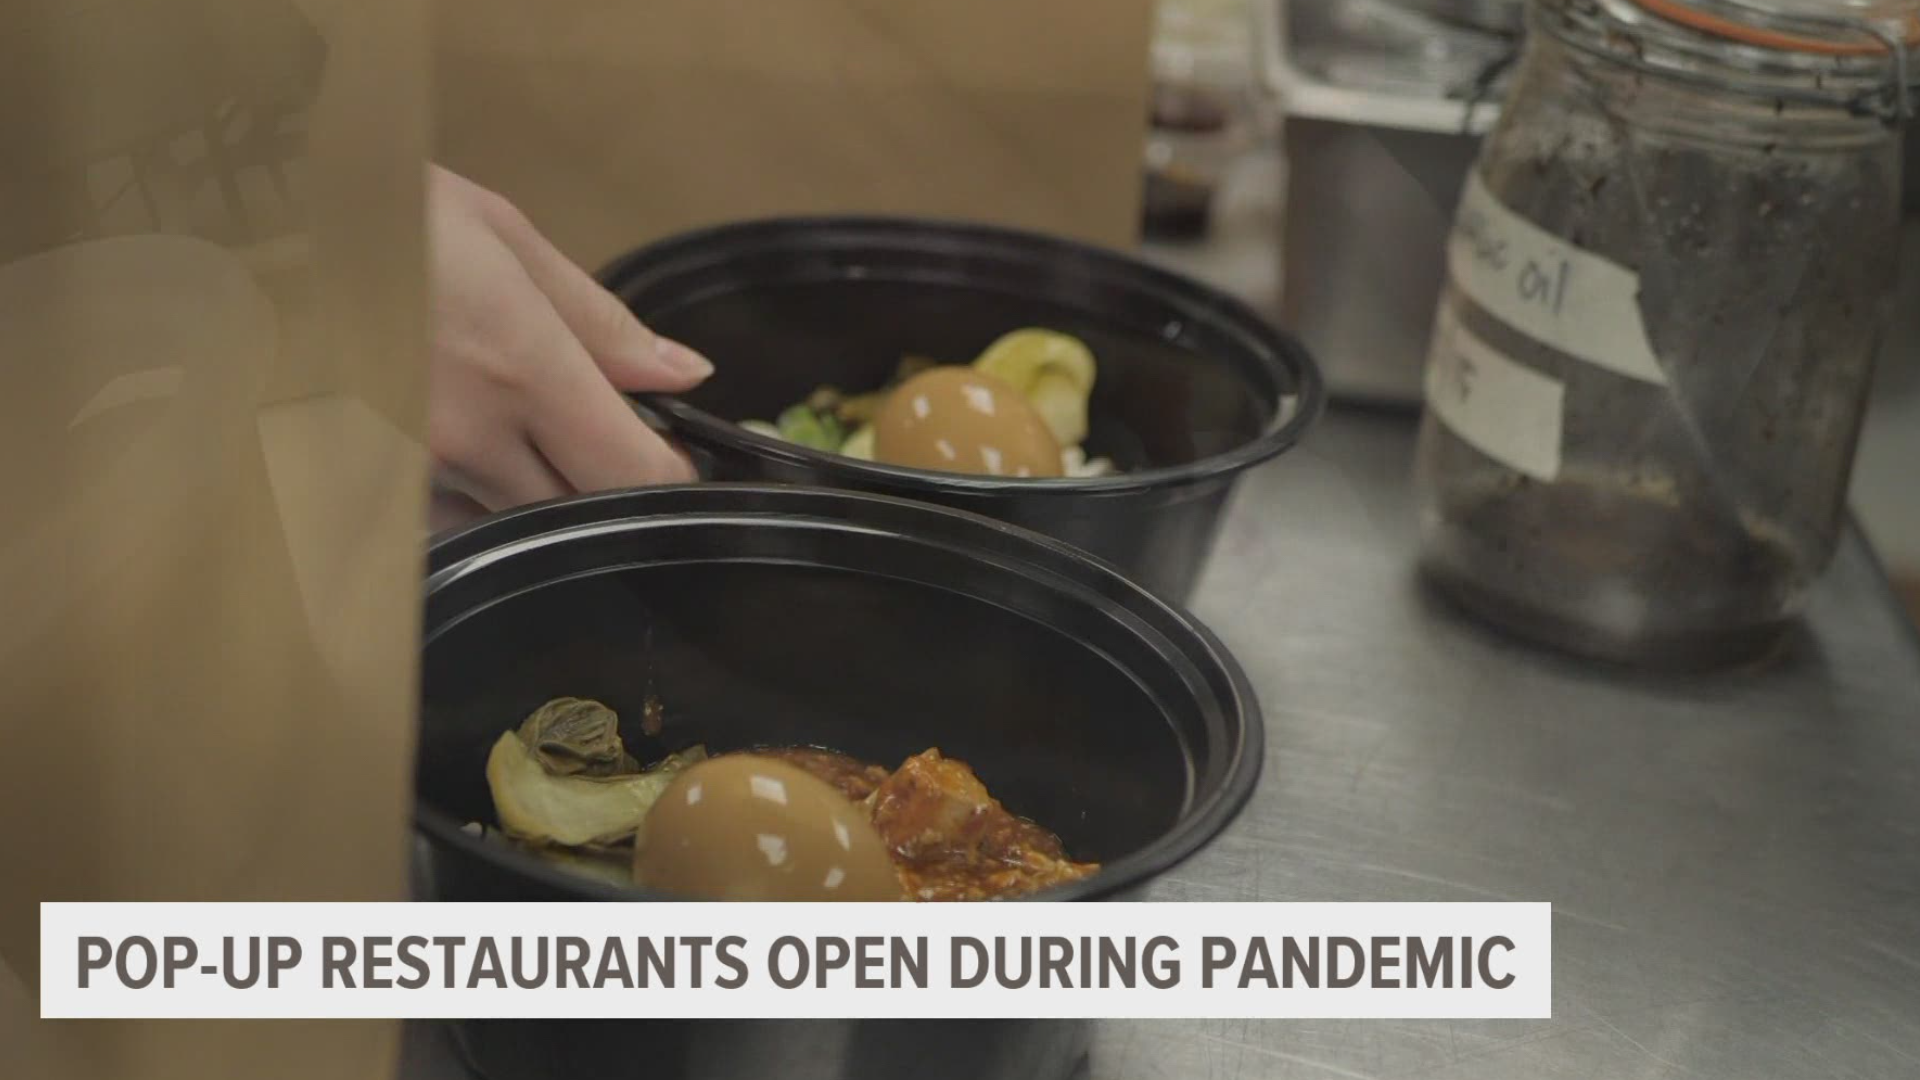 Ramen Club DSM is a pop-up restaurant that started serving customers during the pandemic. Here's how they've made it work out in their favor.